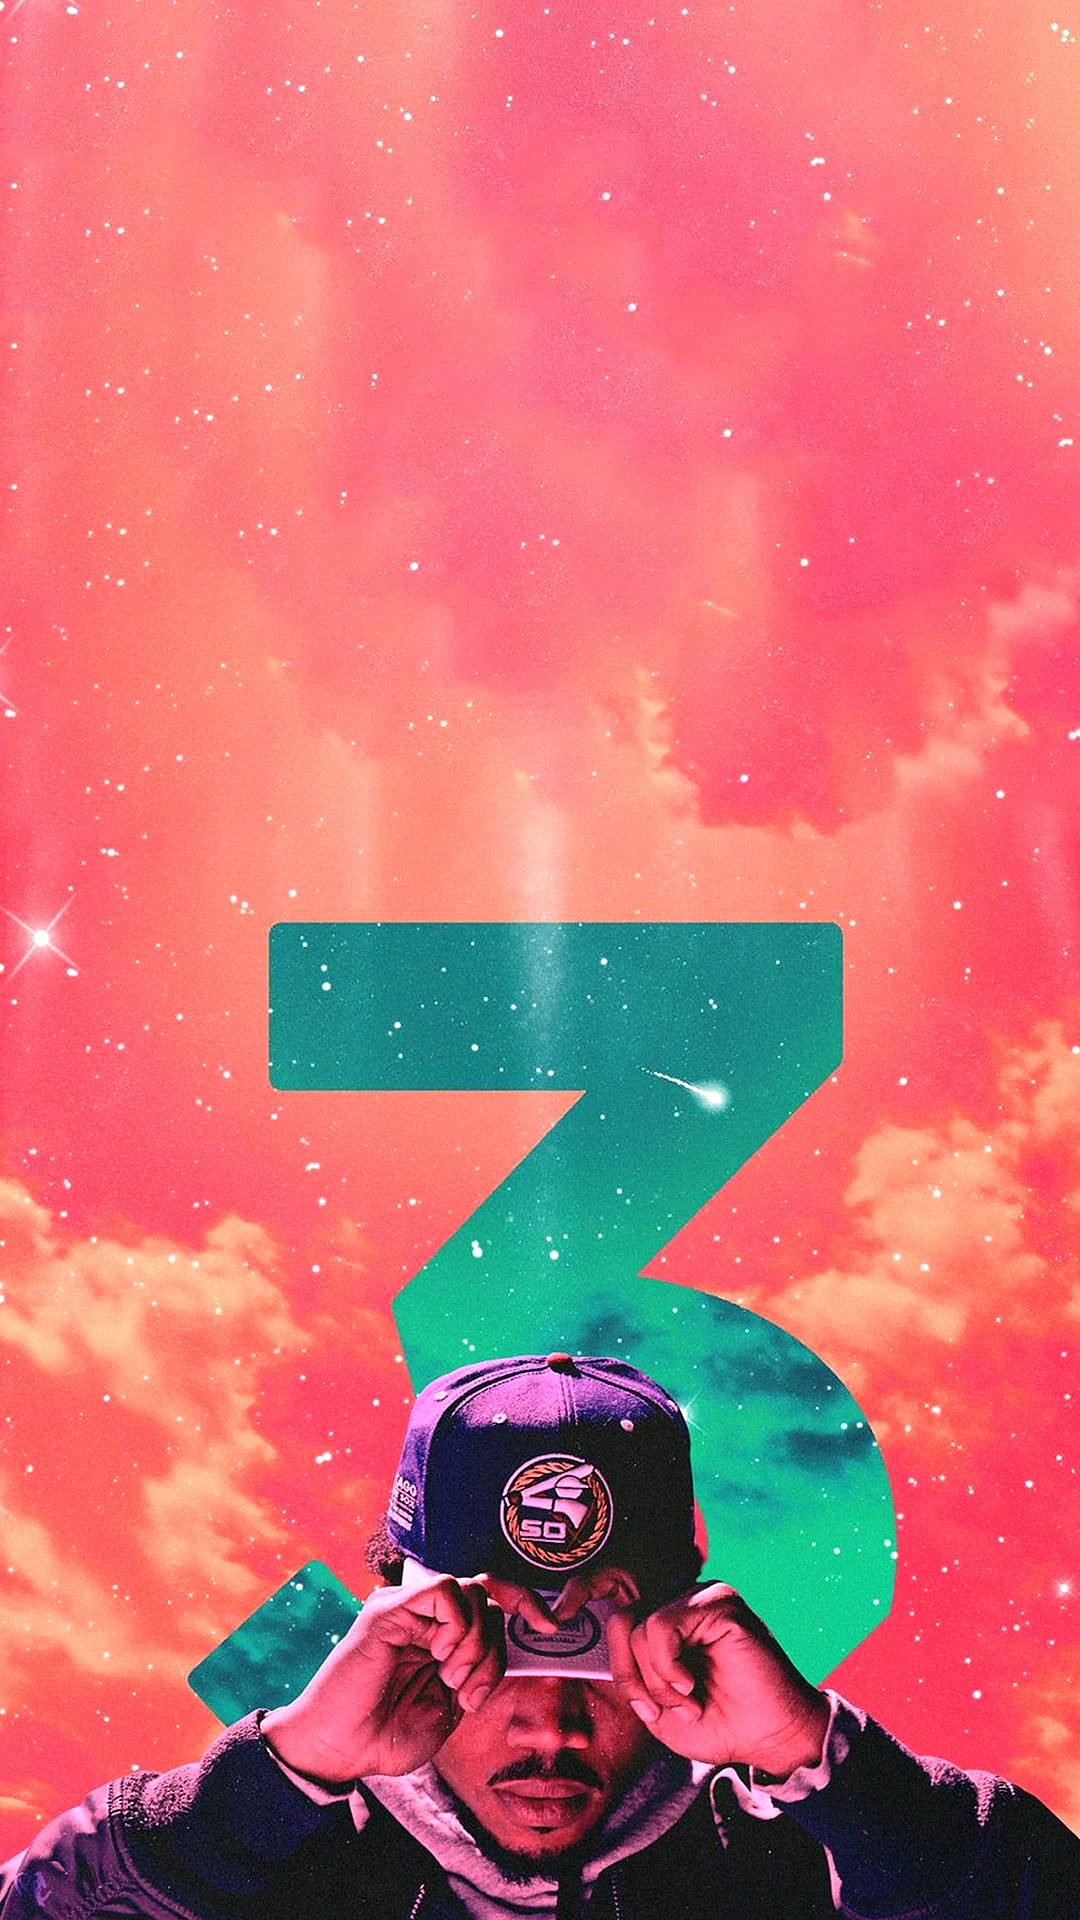 Phone Rapper Wallpaper For iPhone